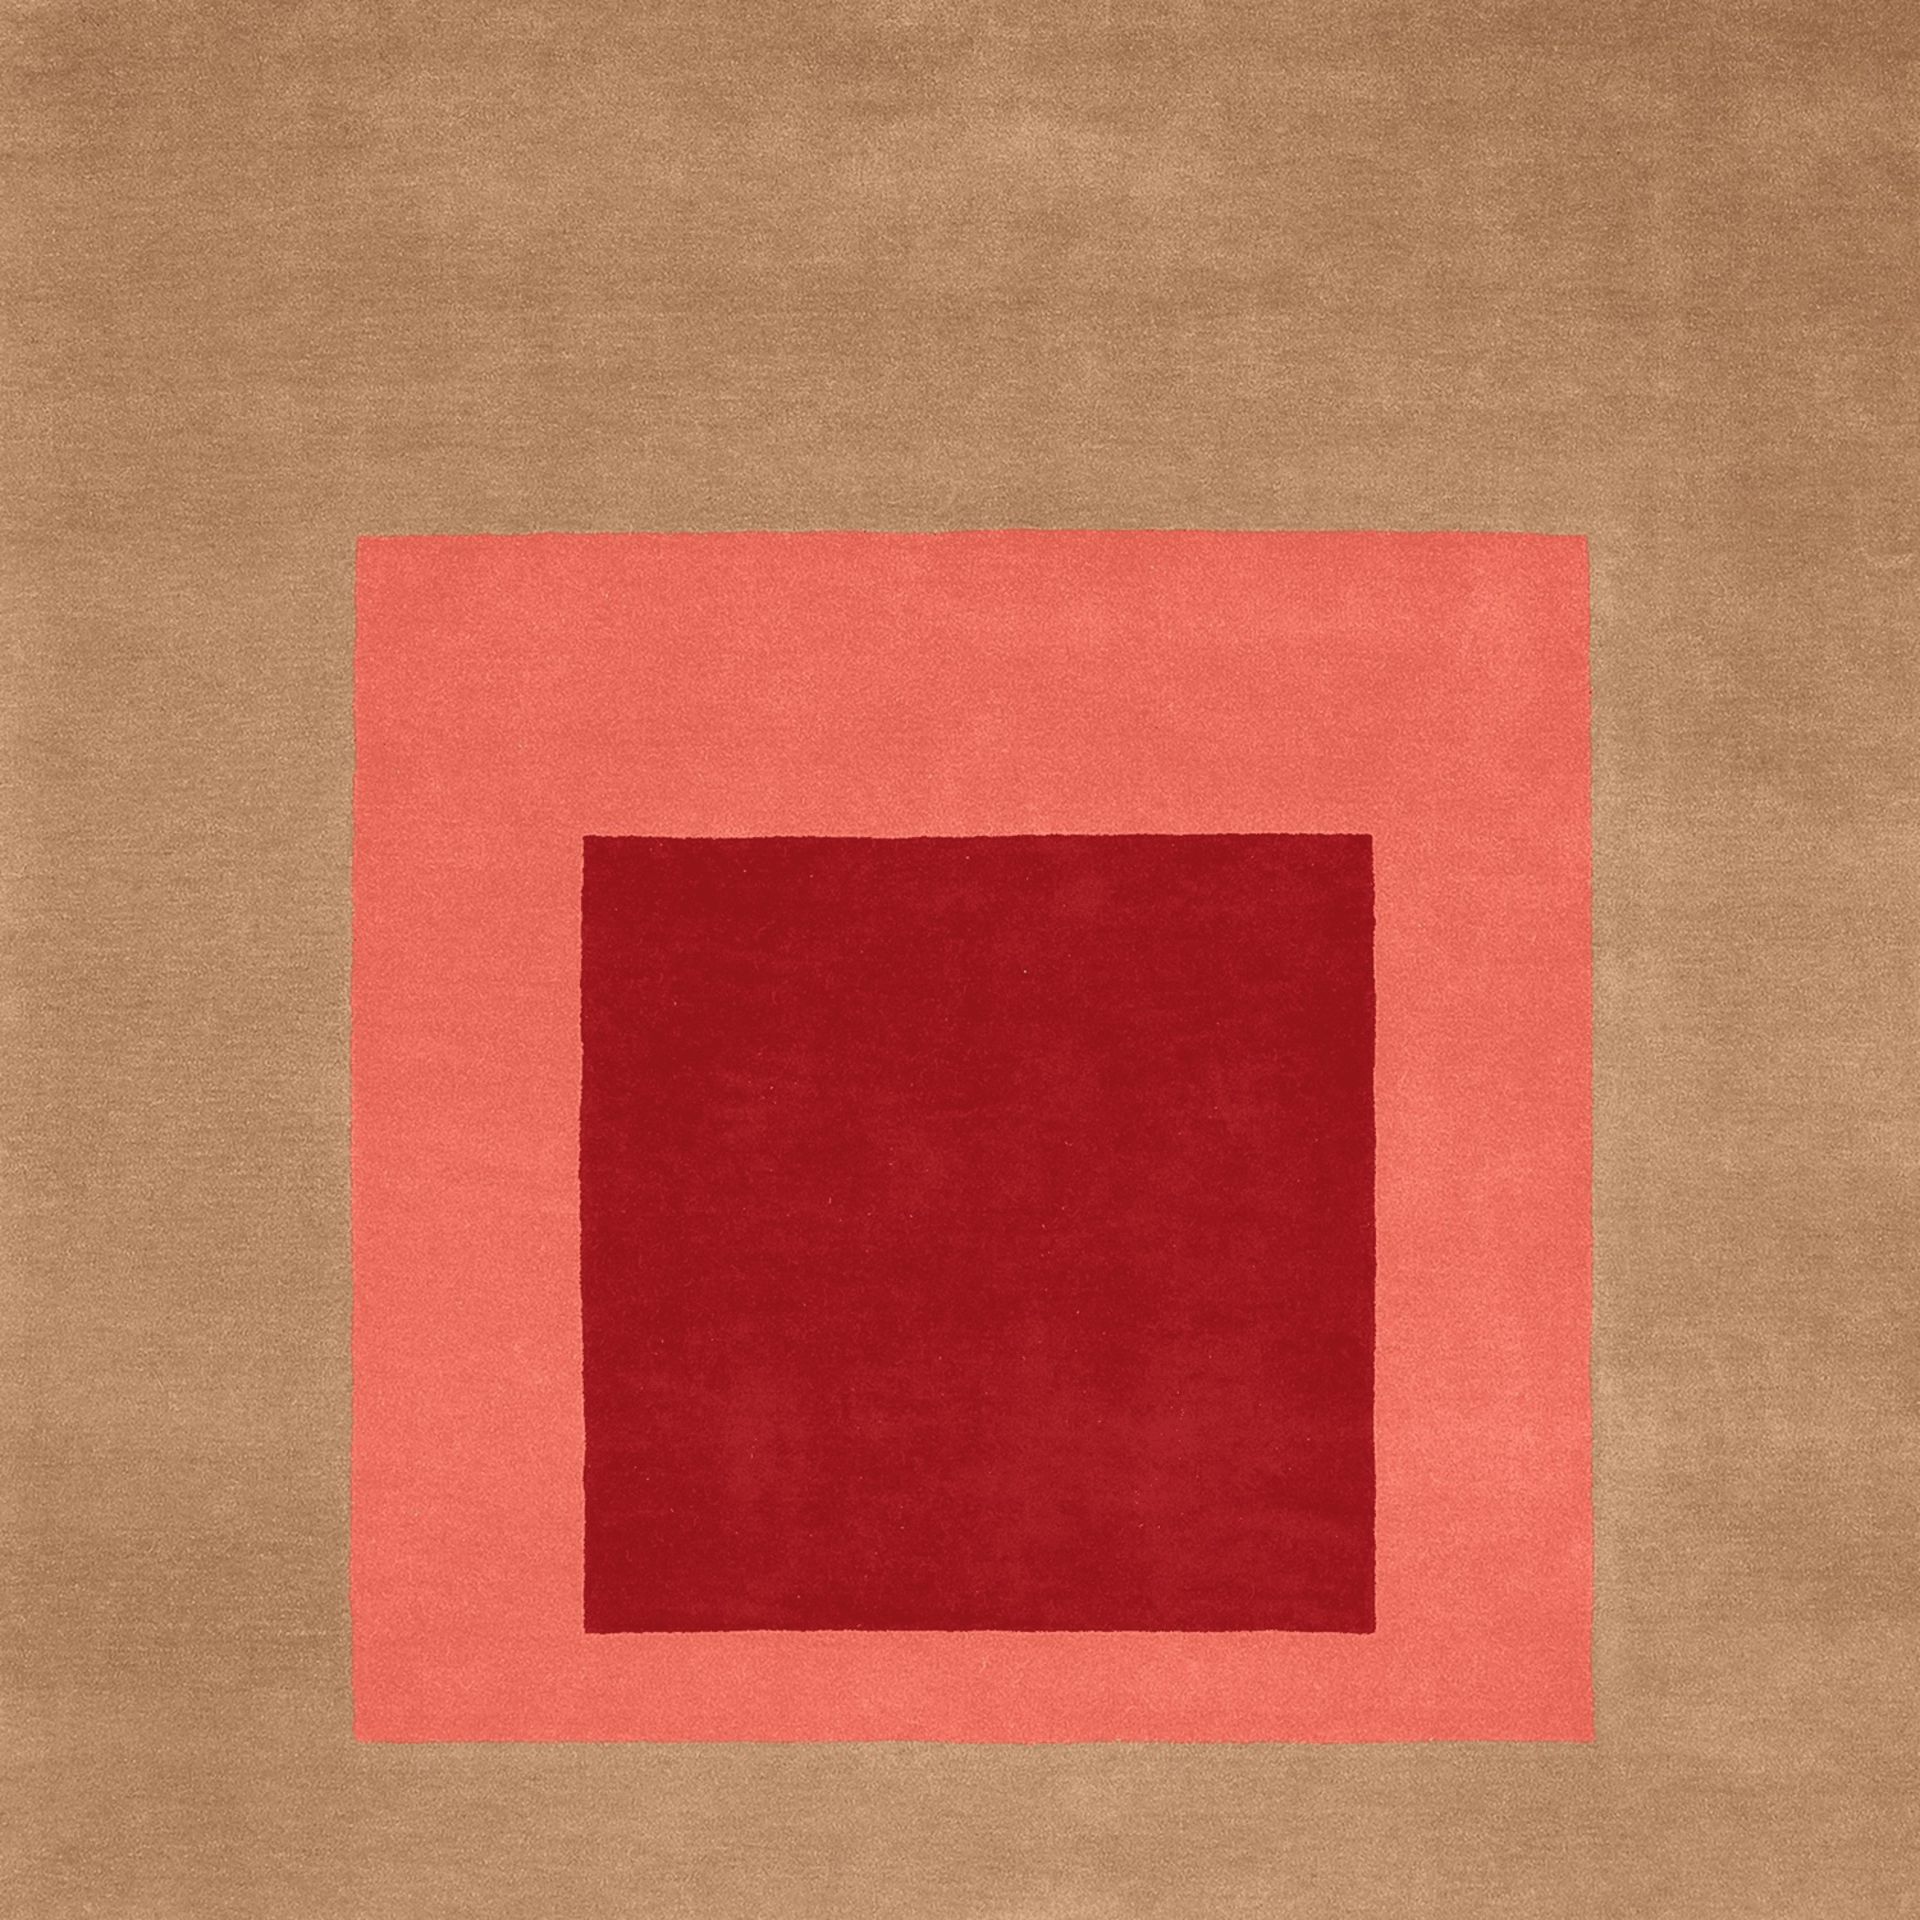 Joseph Albers "Homeage to the Square" Rug - Image 2 of 2